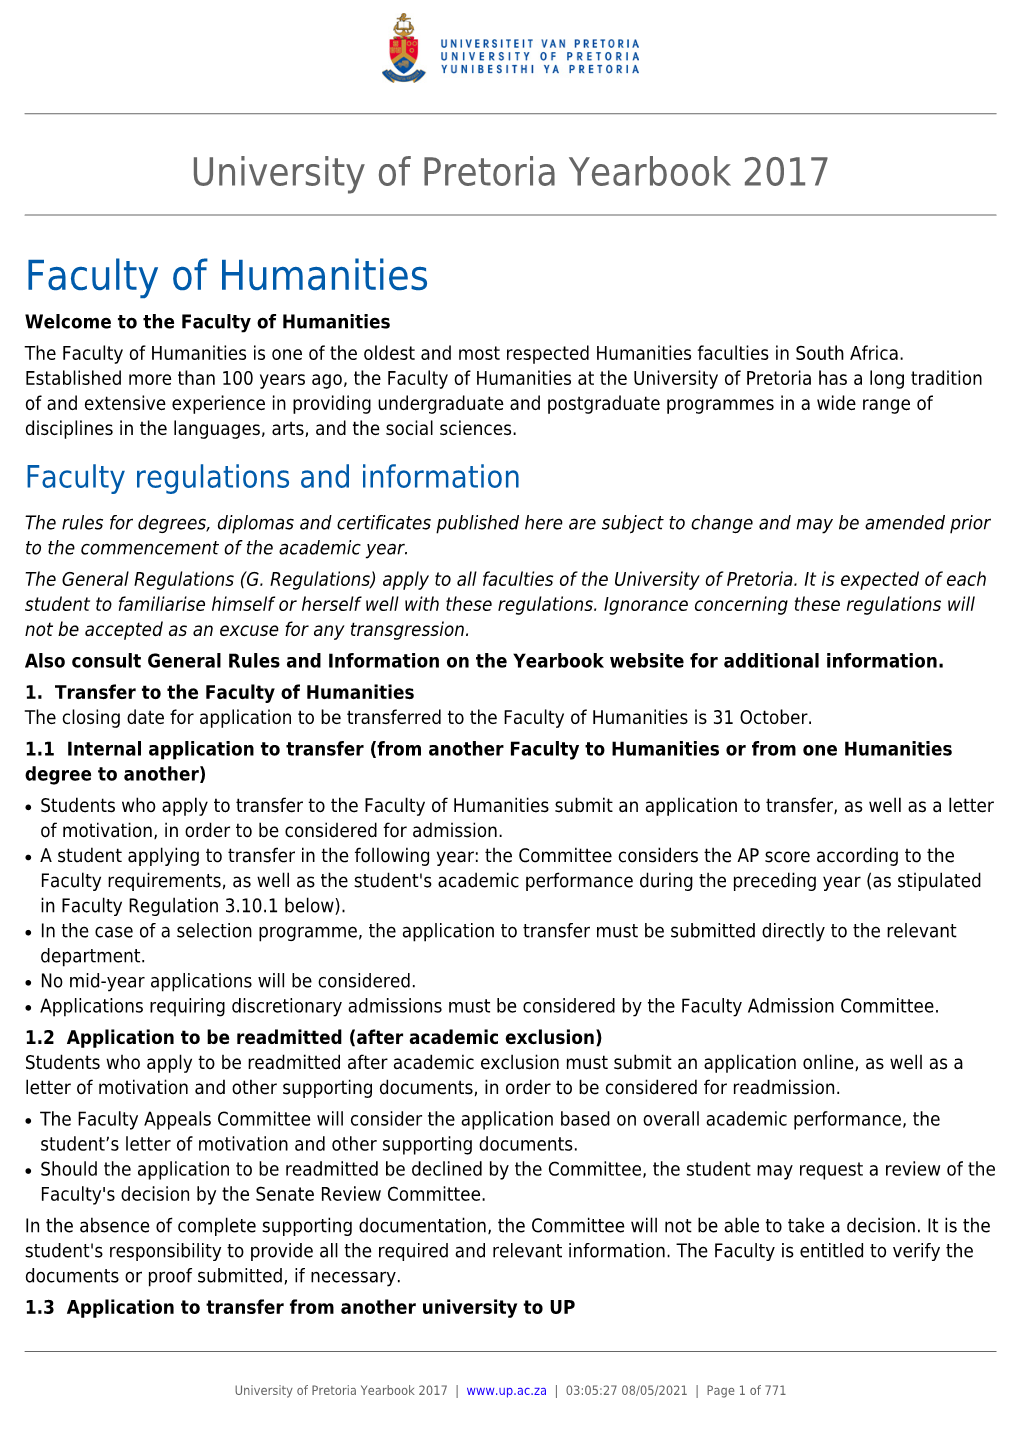 Faculty of Humanities Welcome to the Faculty of Humanities the Faculty of Humanities Is One of the Oldest and Most Respected Humanities Faculties in South Africa